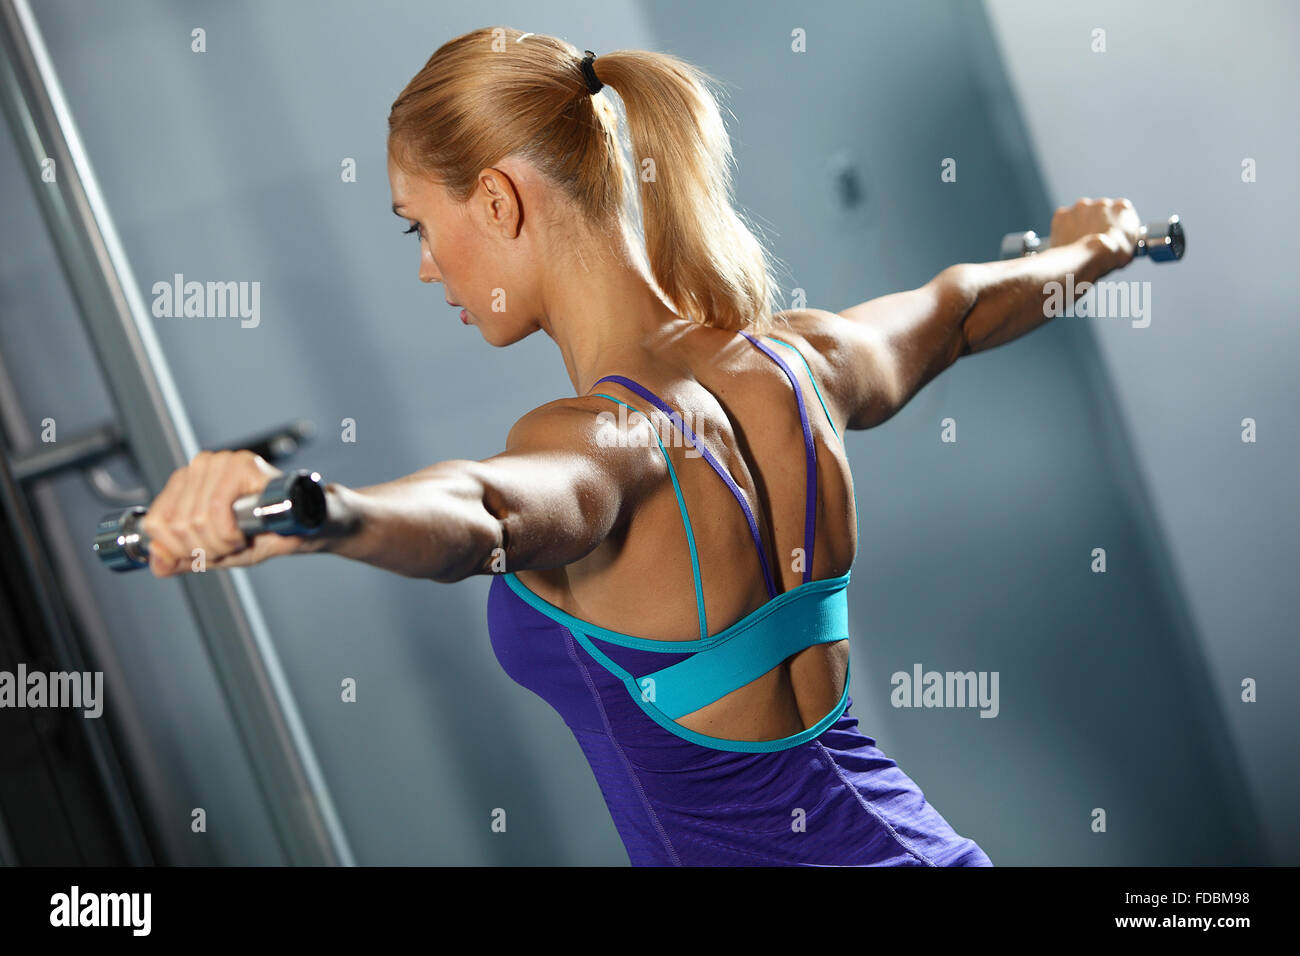 Image of fitness girl in gym exercising with dumbbells Stock Photo